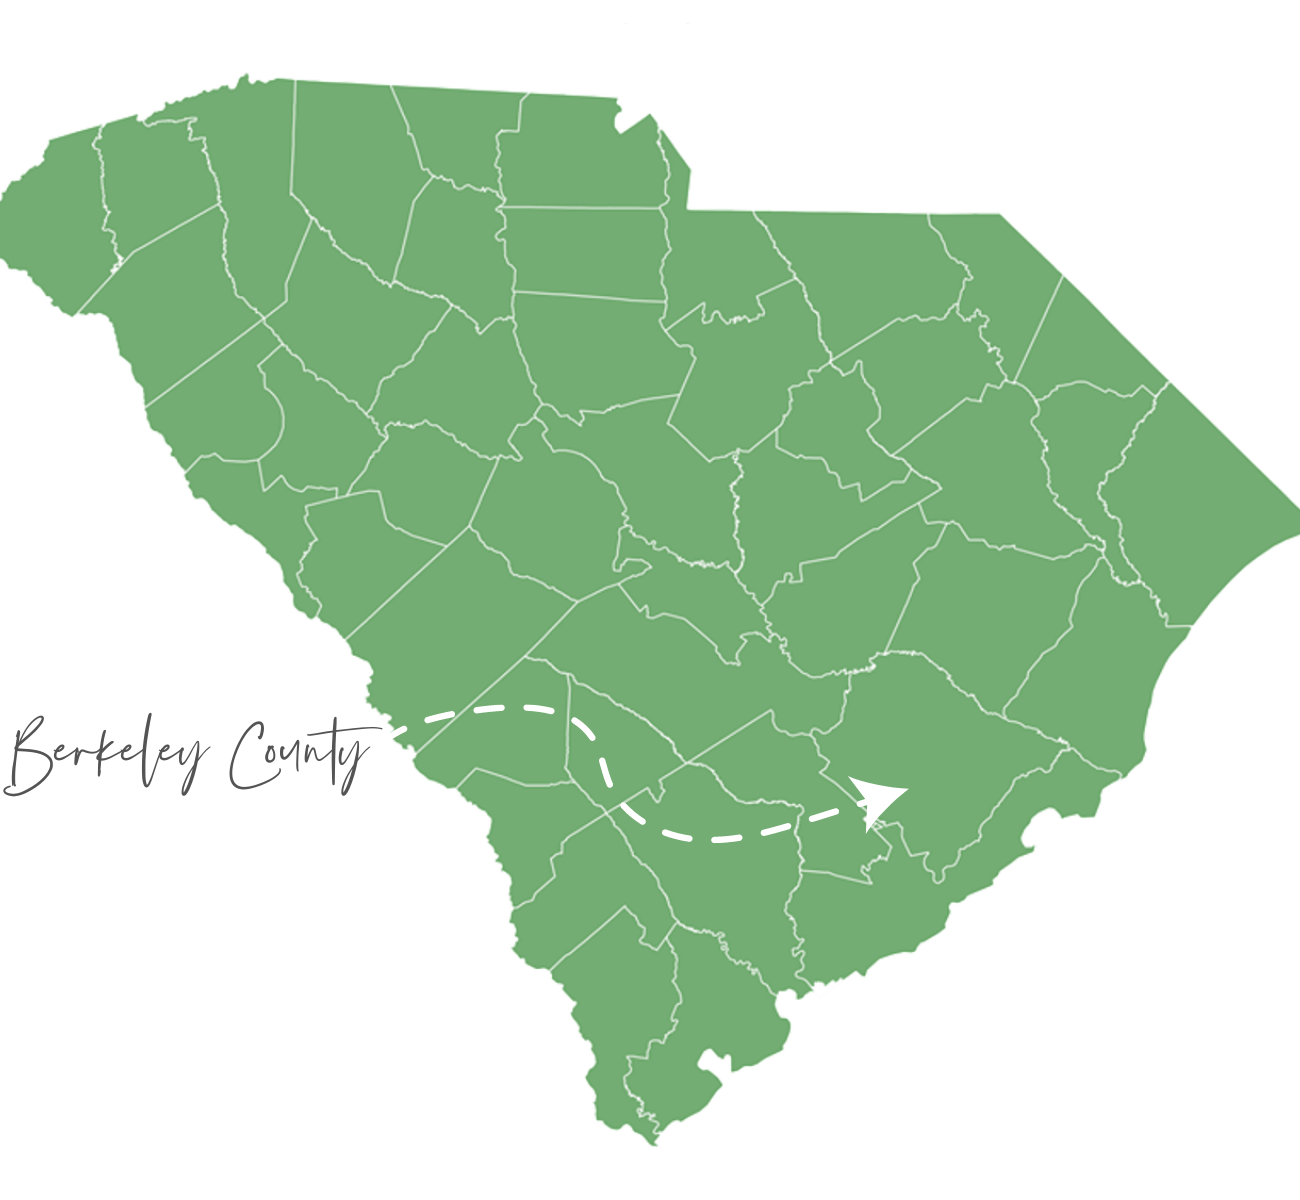 10 Reasons To Fall In Love With Berkeley County South Carolina